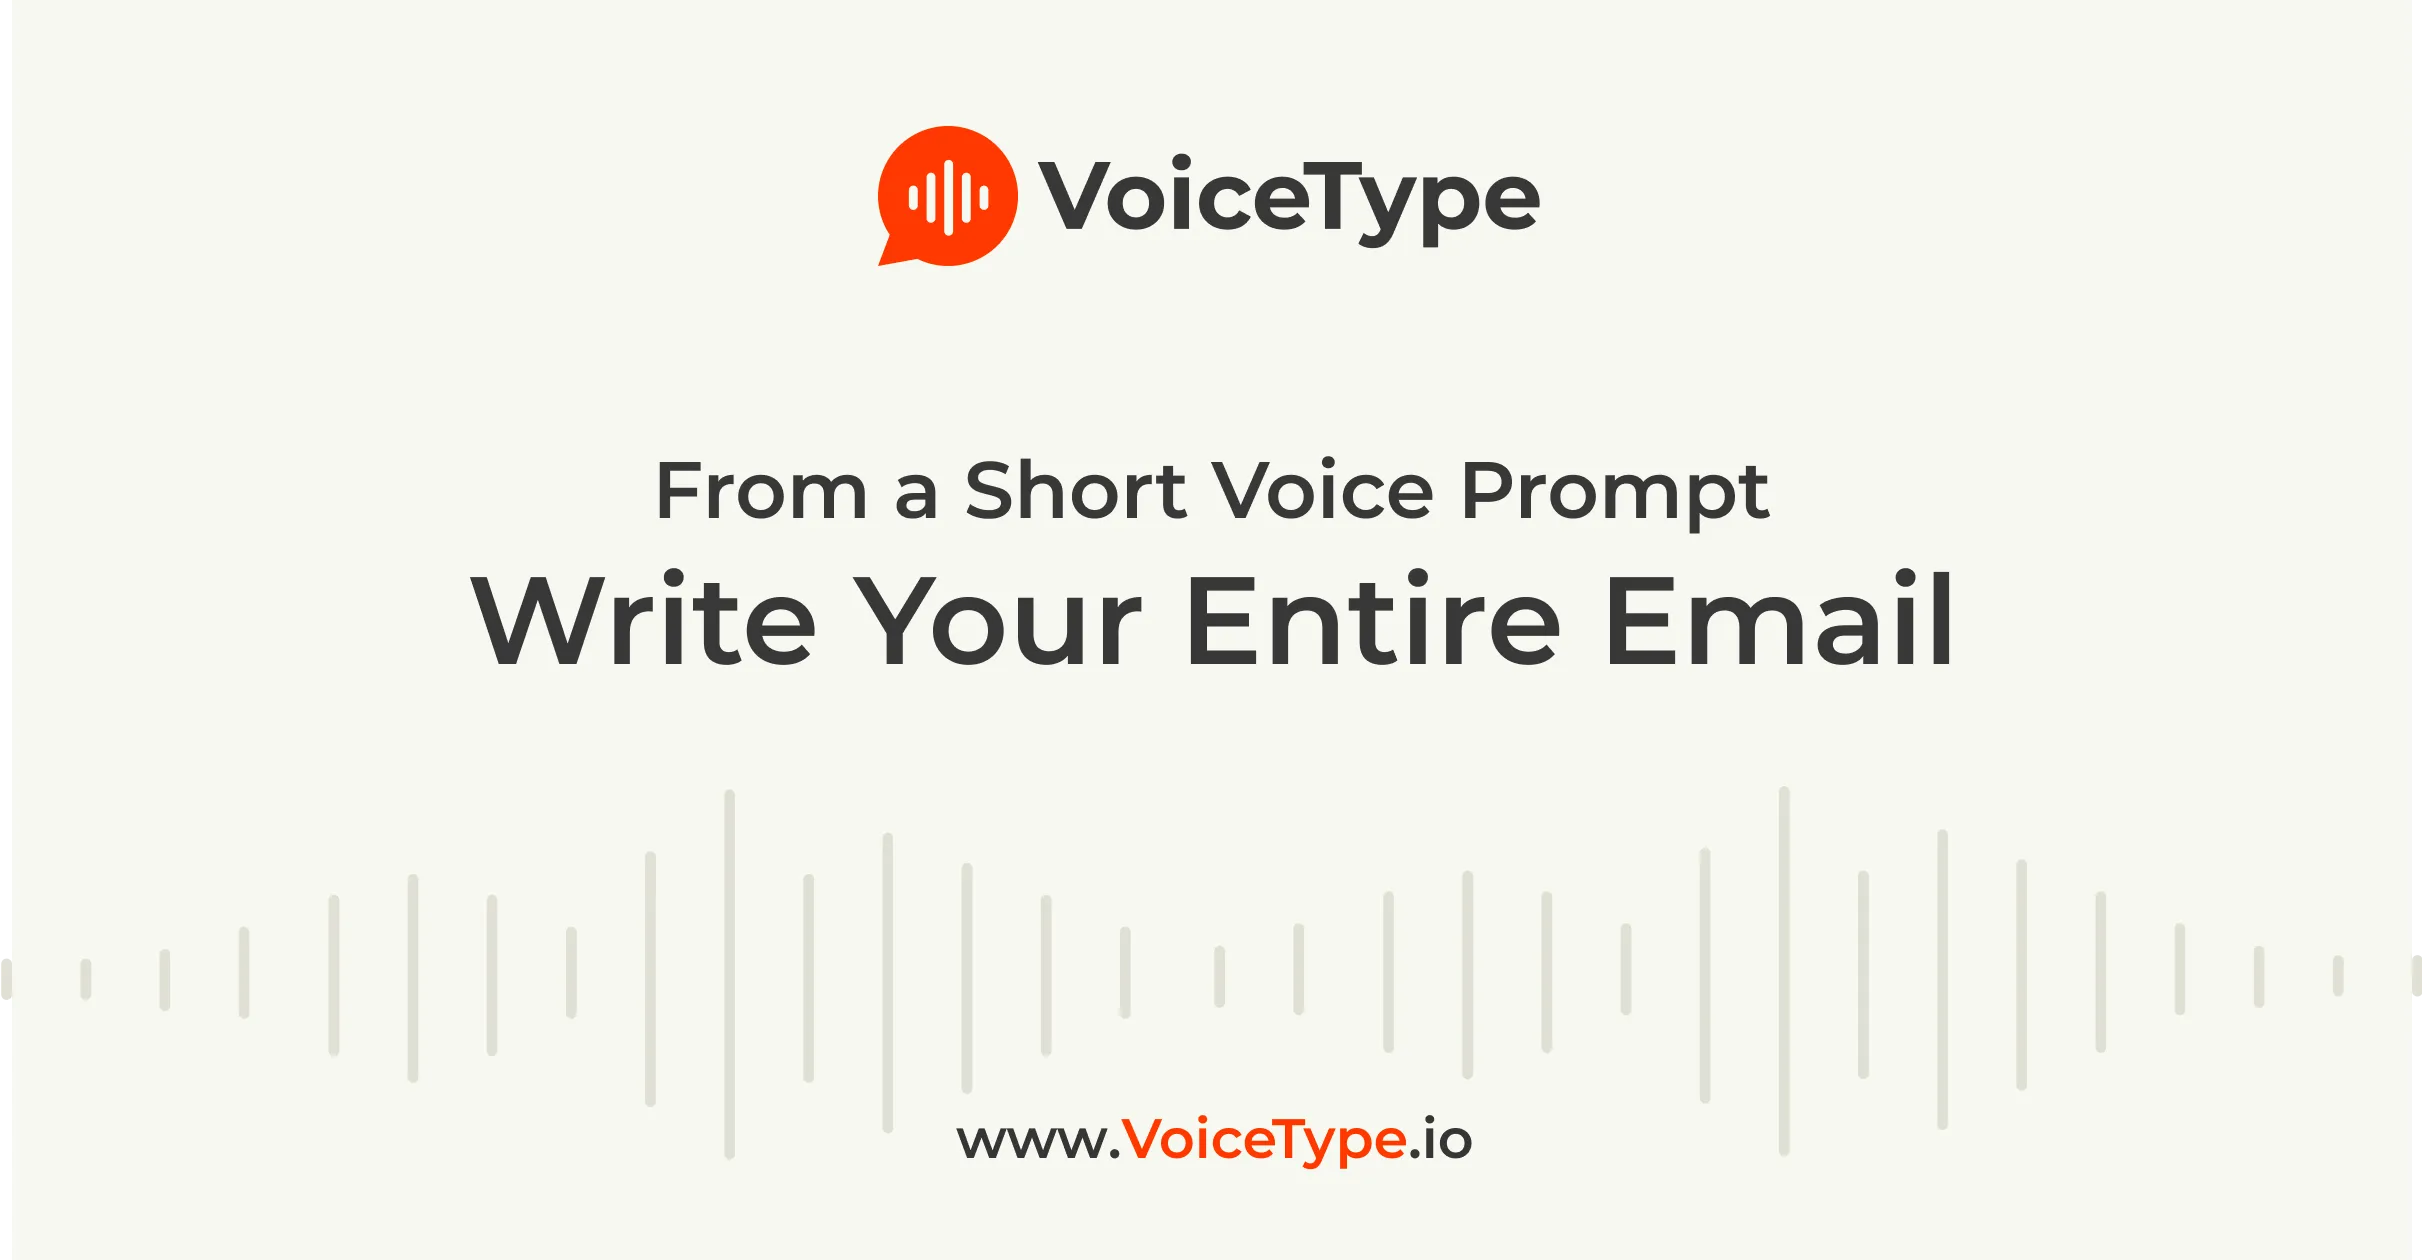 VoiceType - Chrome browser extension that uses AI to help write emails